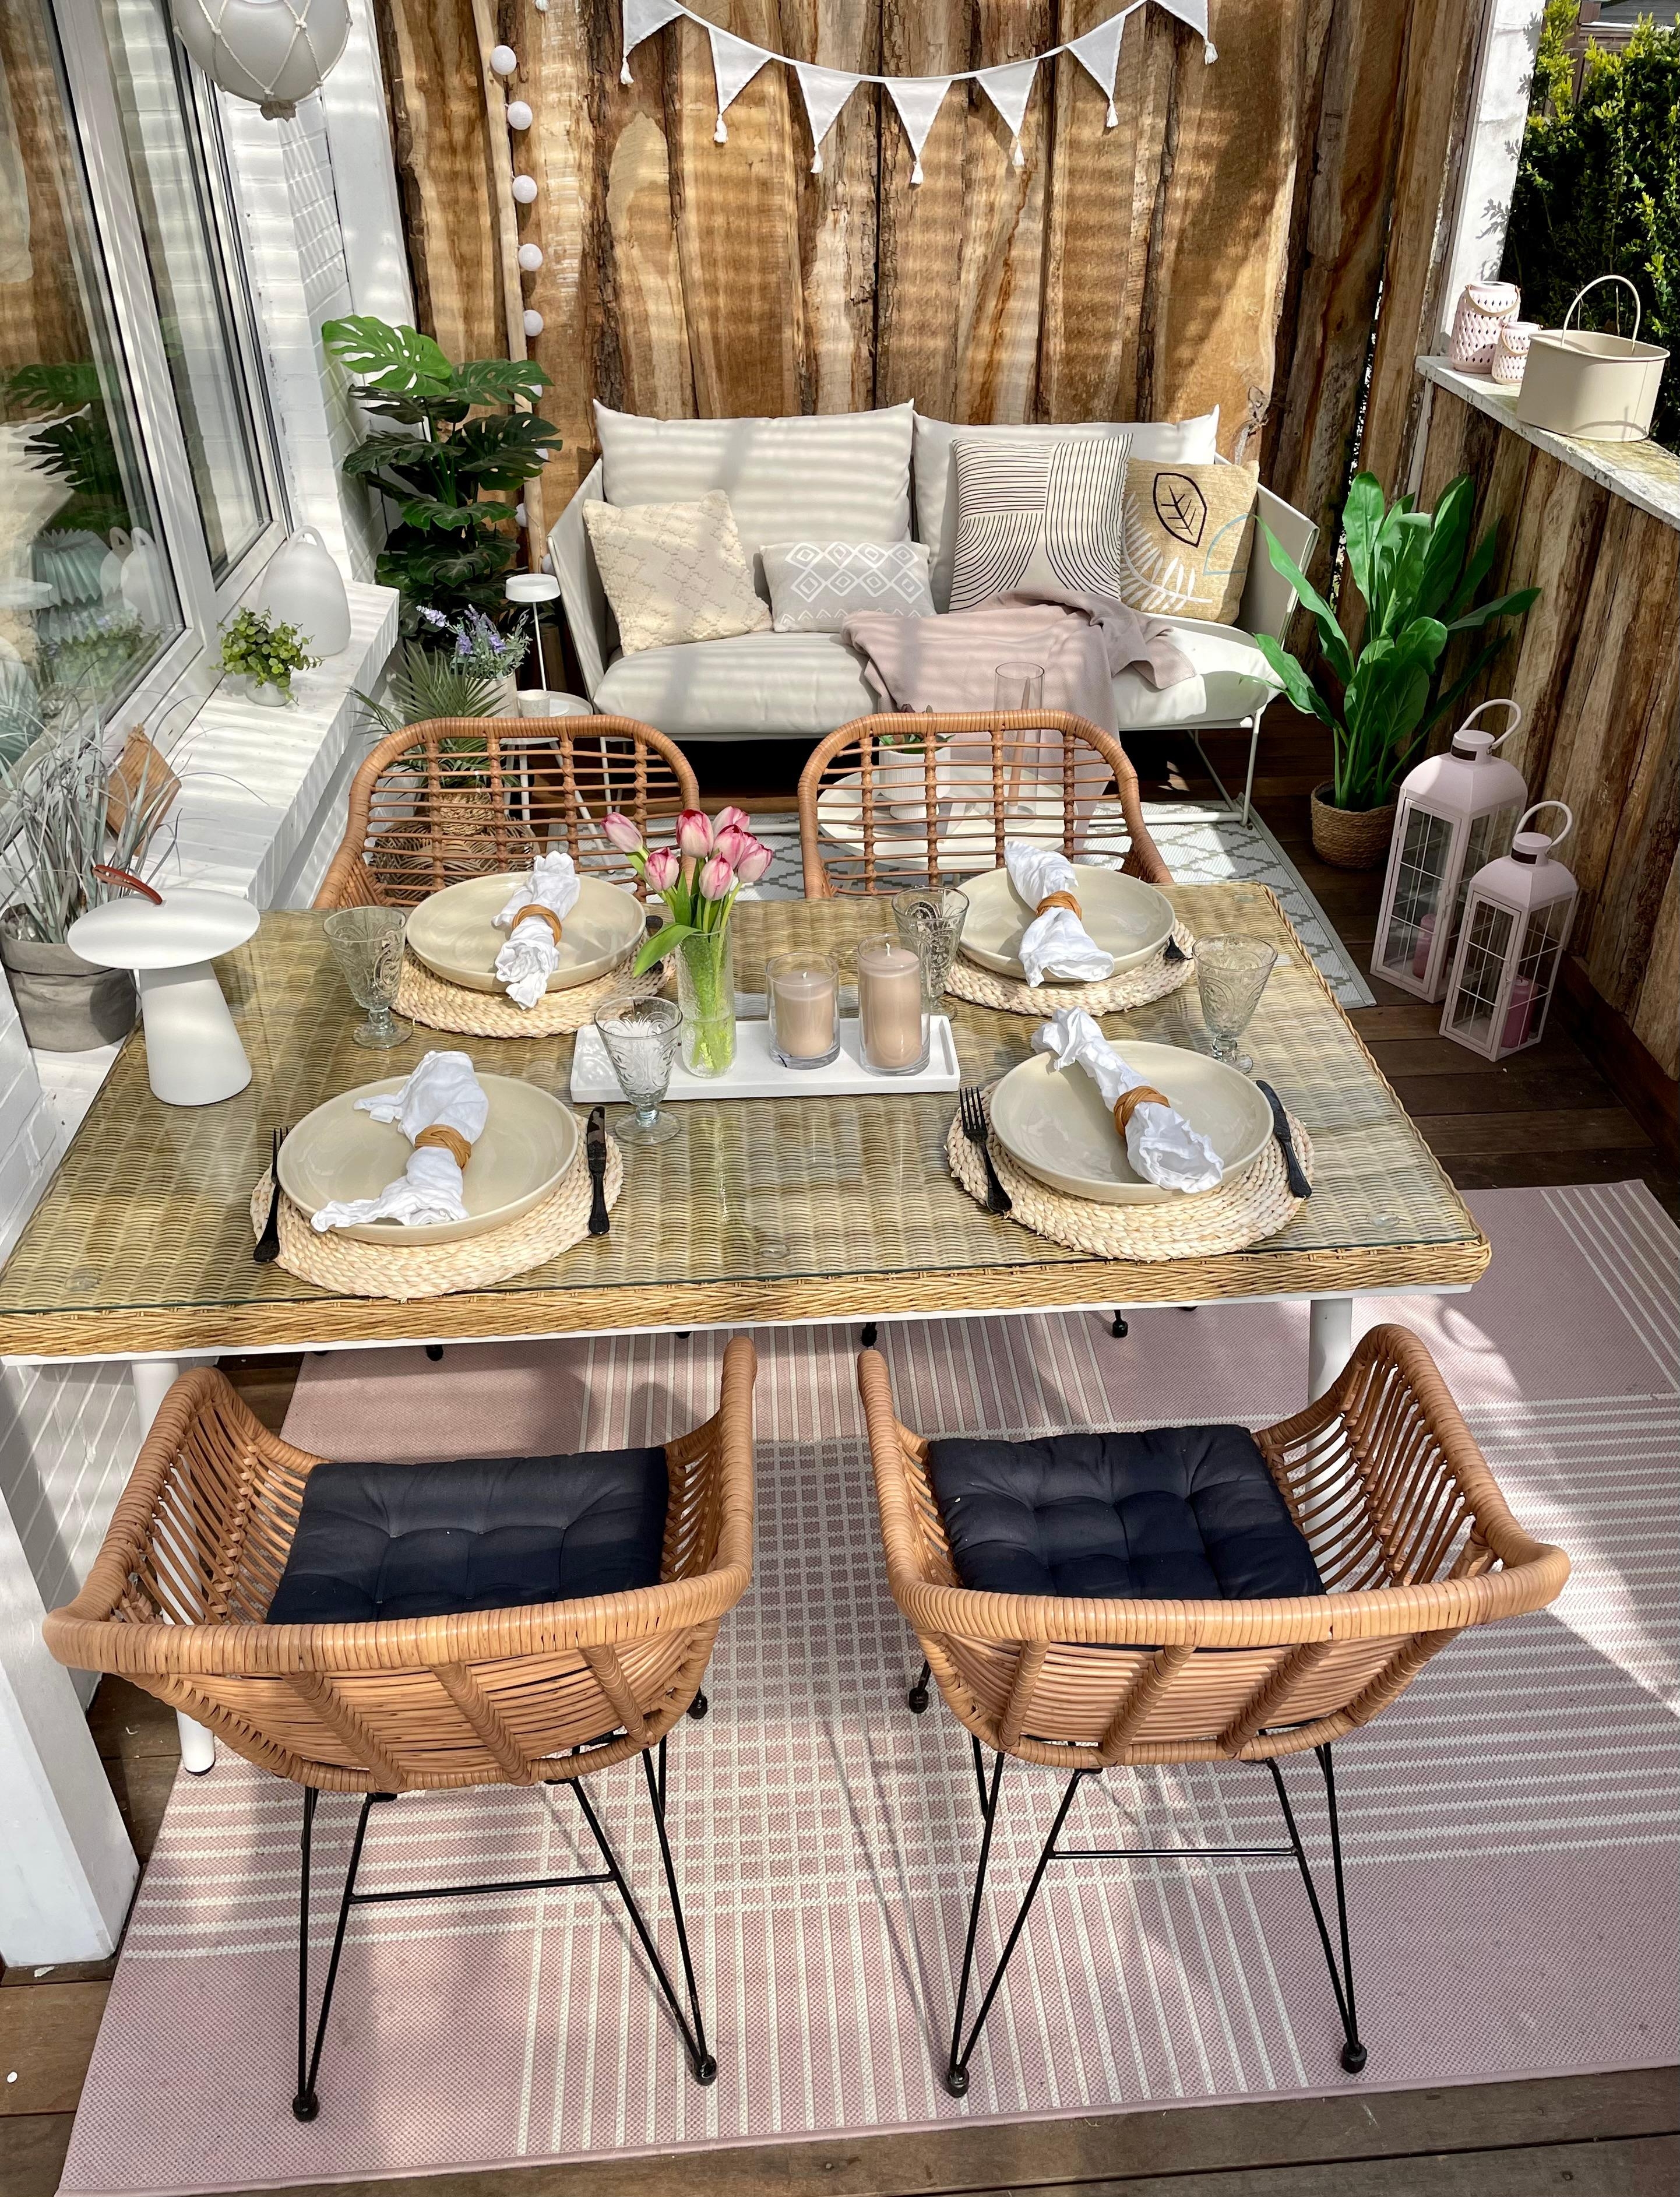 Table Setting für die #terrasse #tablesetting #outdoor #COUCHstyle #couchmagazin